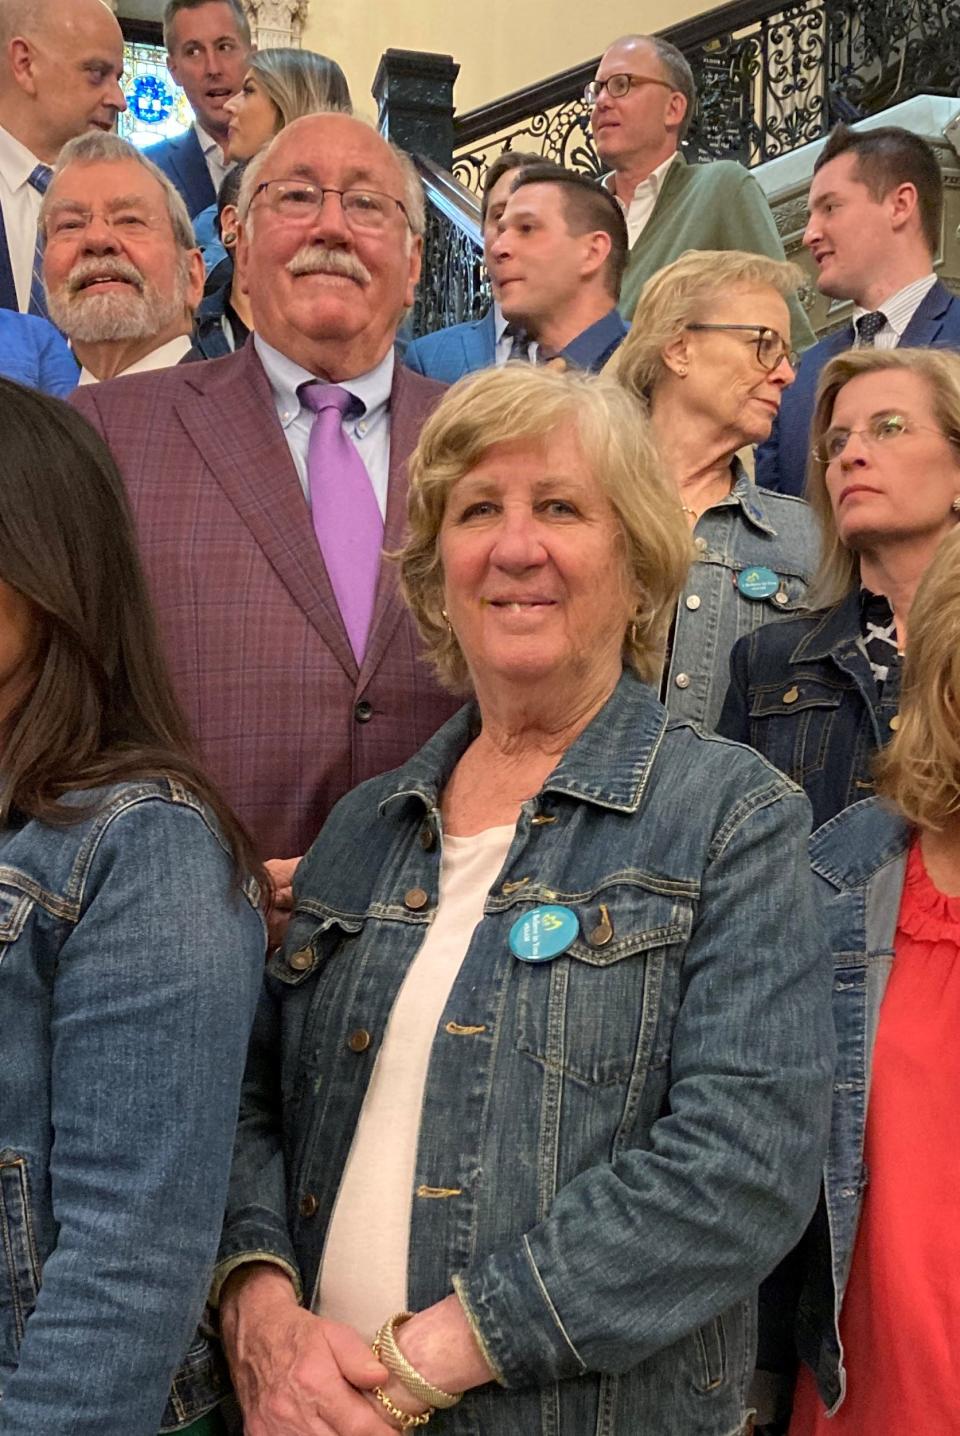 Worcester-area Reps. Mary Keefe, D-Worcester, and James O'Day, D-West Boylston, wear denim to mark Denim Day in solidarity with survivors of sexual assault and violence during Sexual Assault Awareness Month, celebrated in April.